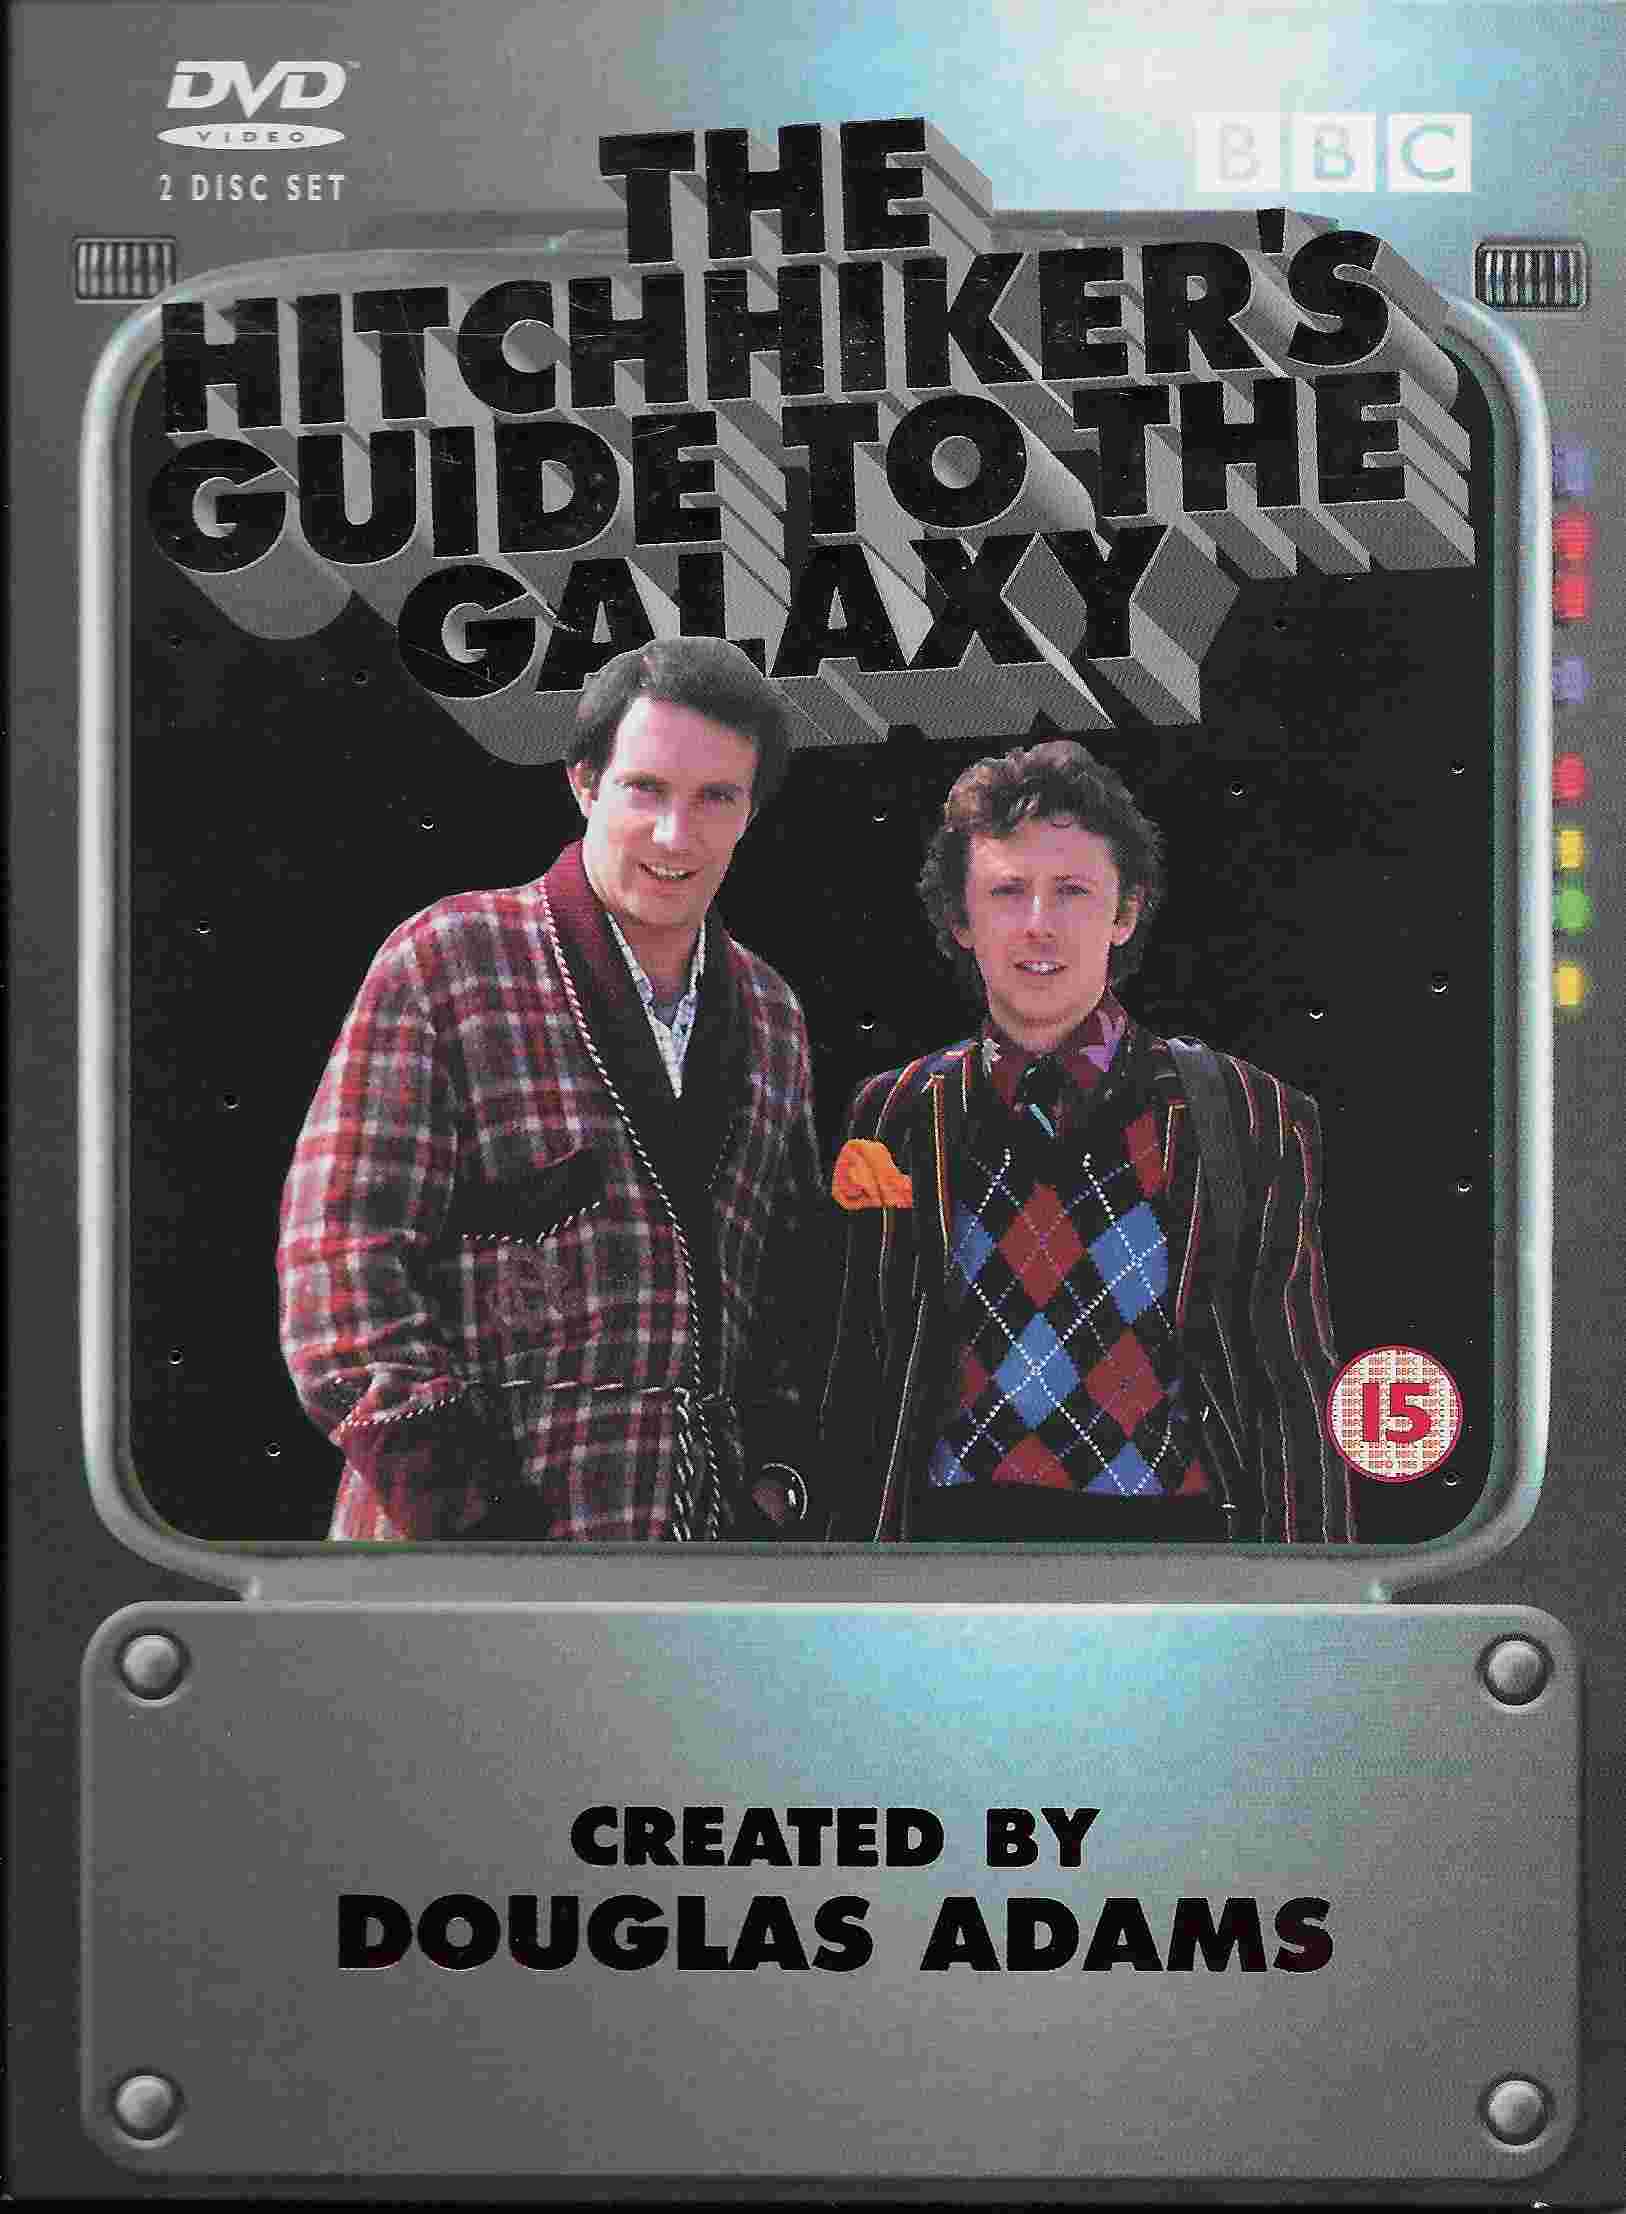 Picture of BBCDVD 1092 The hitchhiker's guide to the galaxy by artist Douglas Adams from the BBC dvds - Records and Tapes library